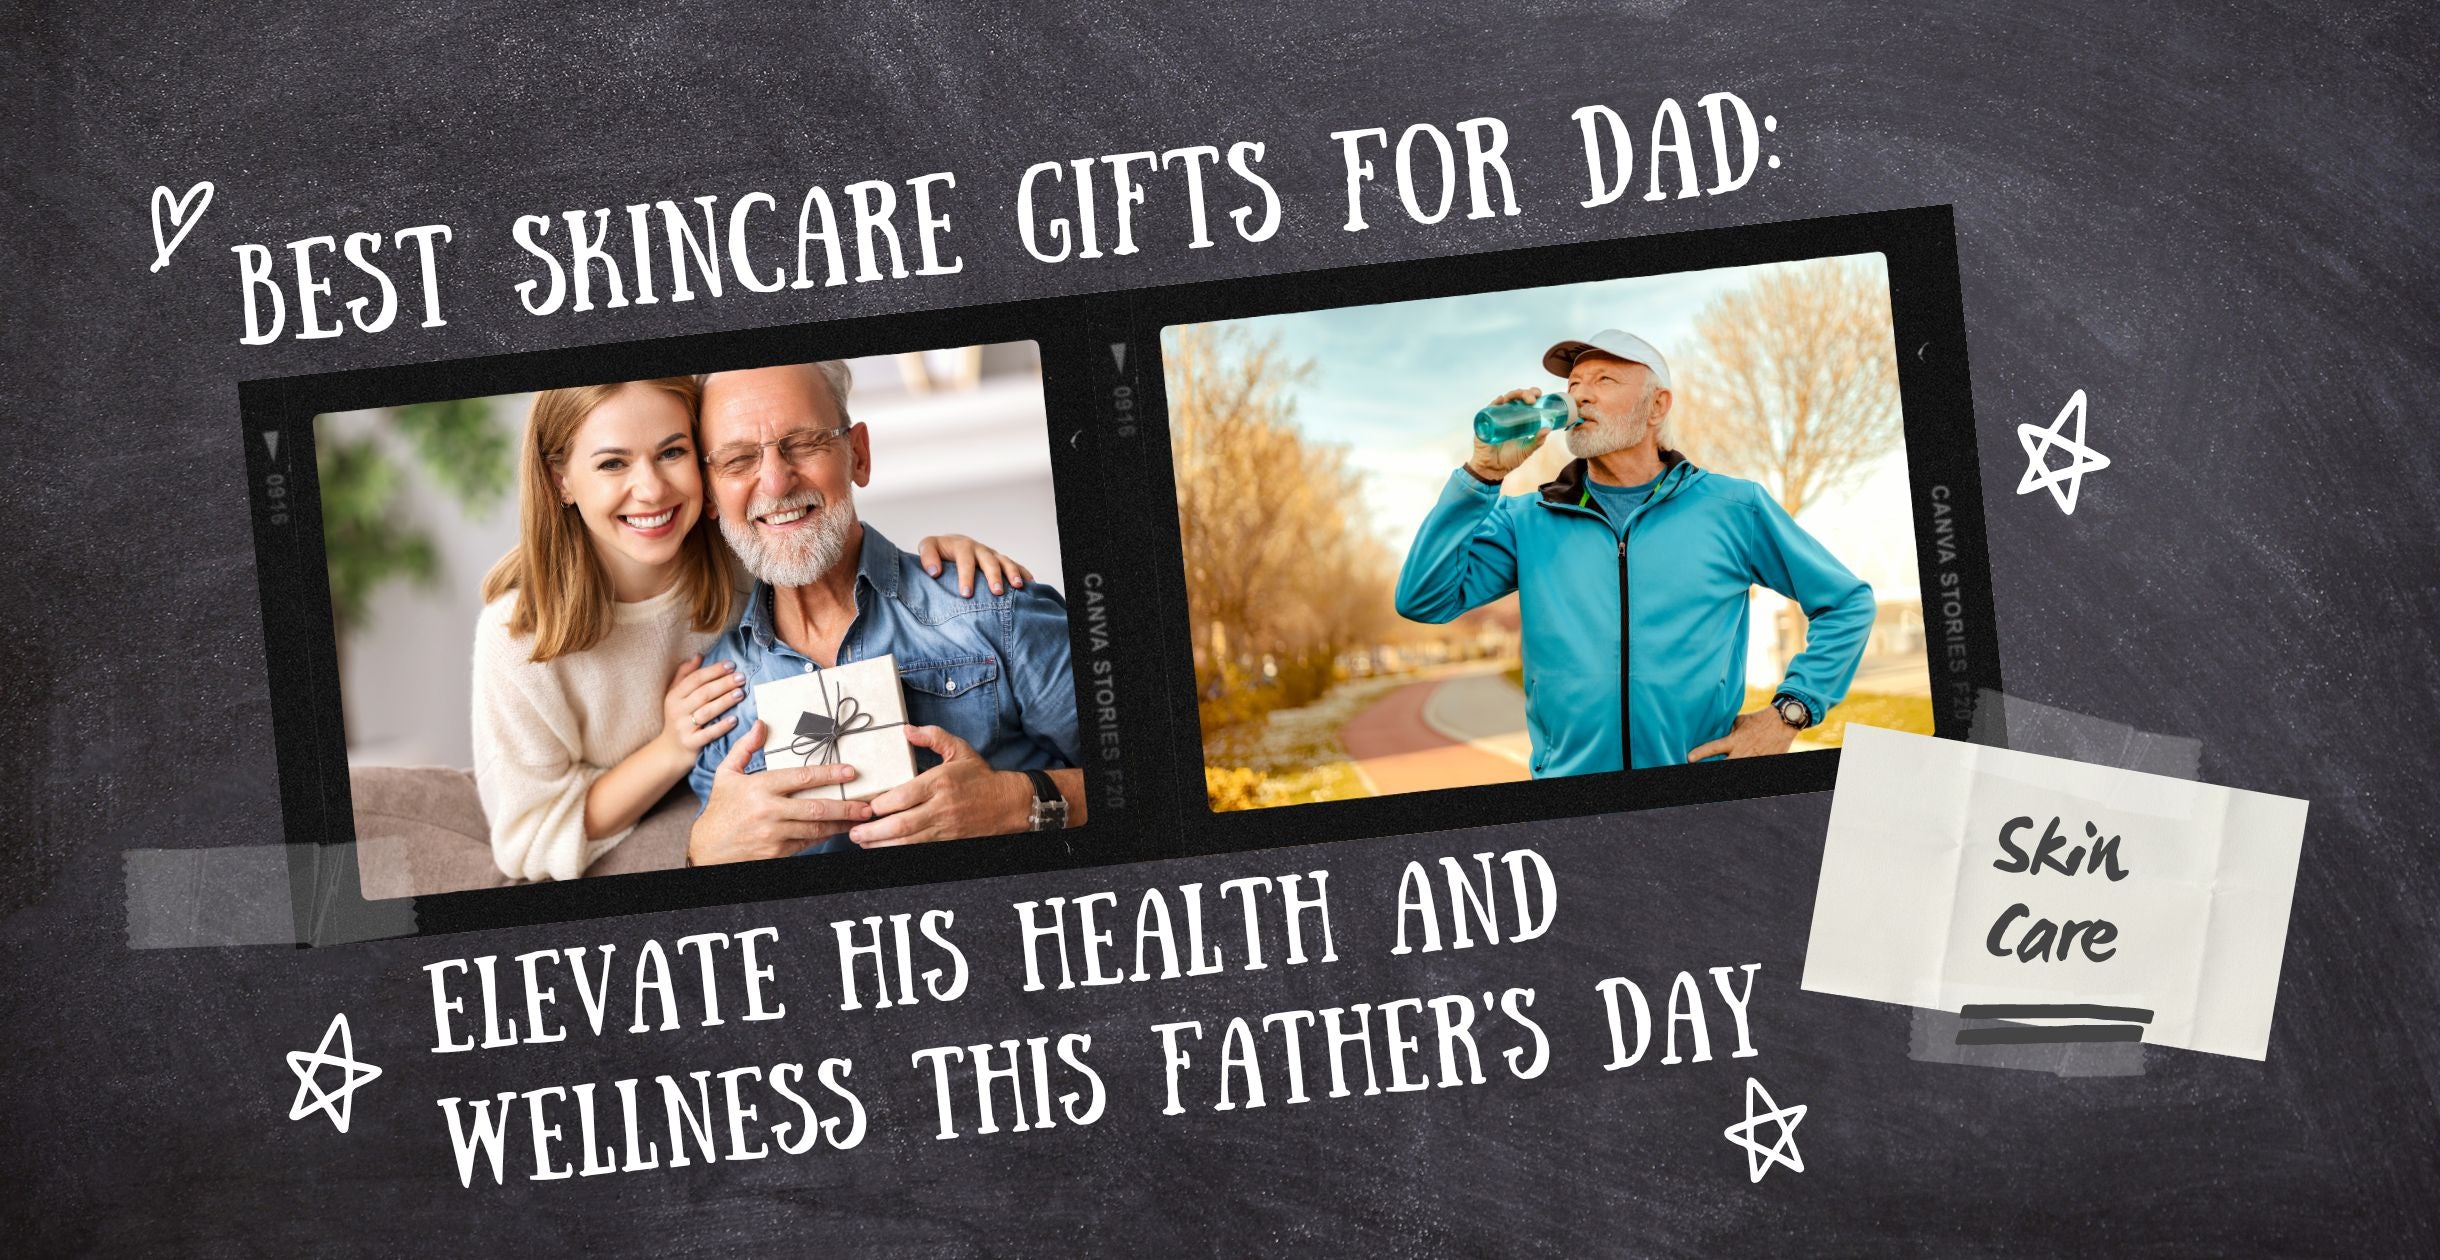 Best Skincare Gifts for Dad: Elevate His Health and Wellness This Father's Day